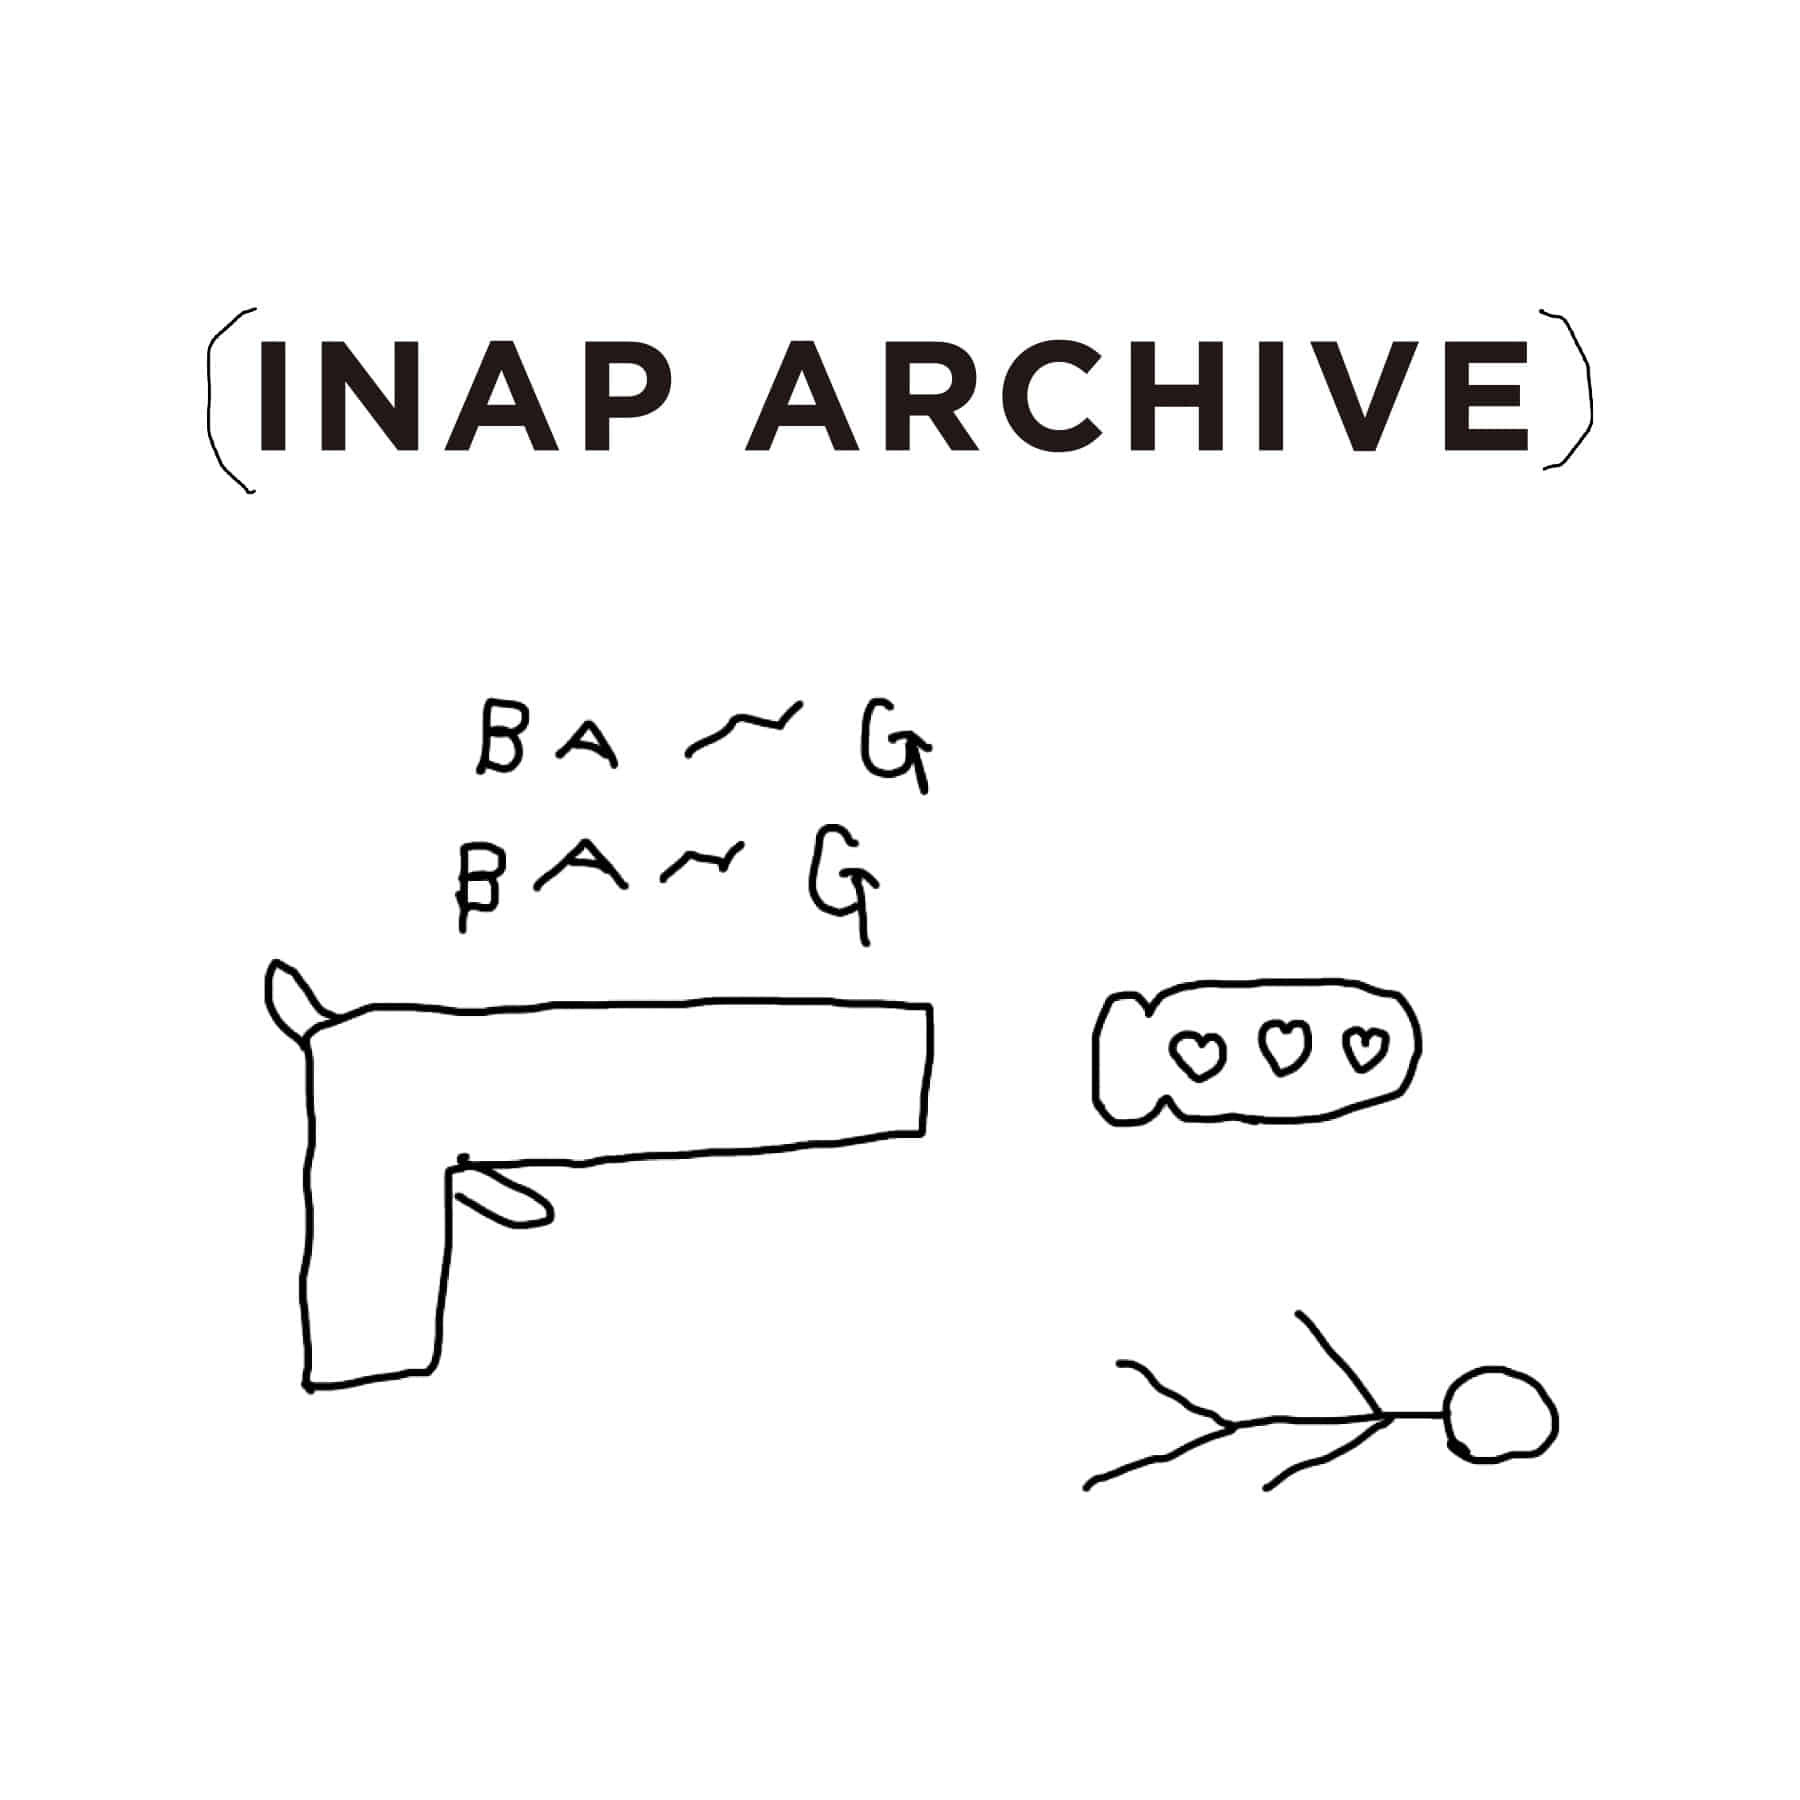 INAP ARCHIVE